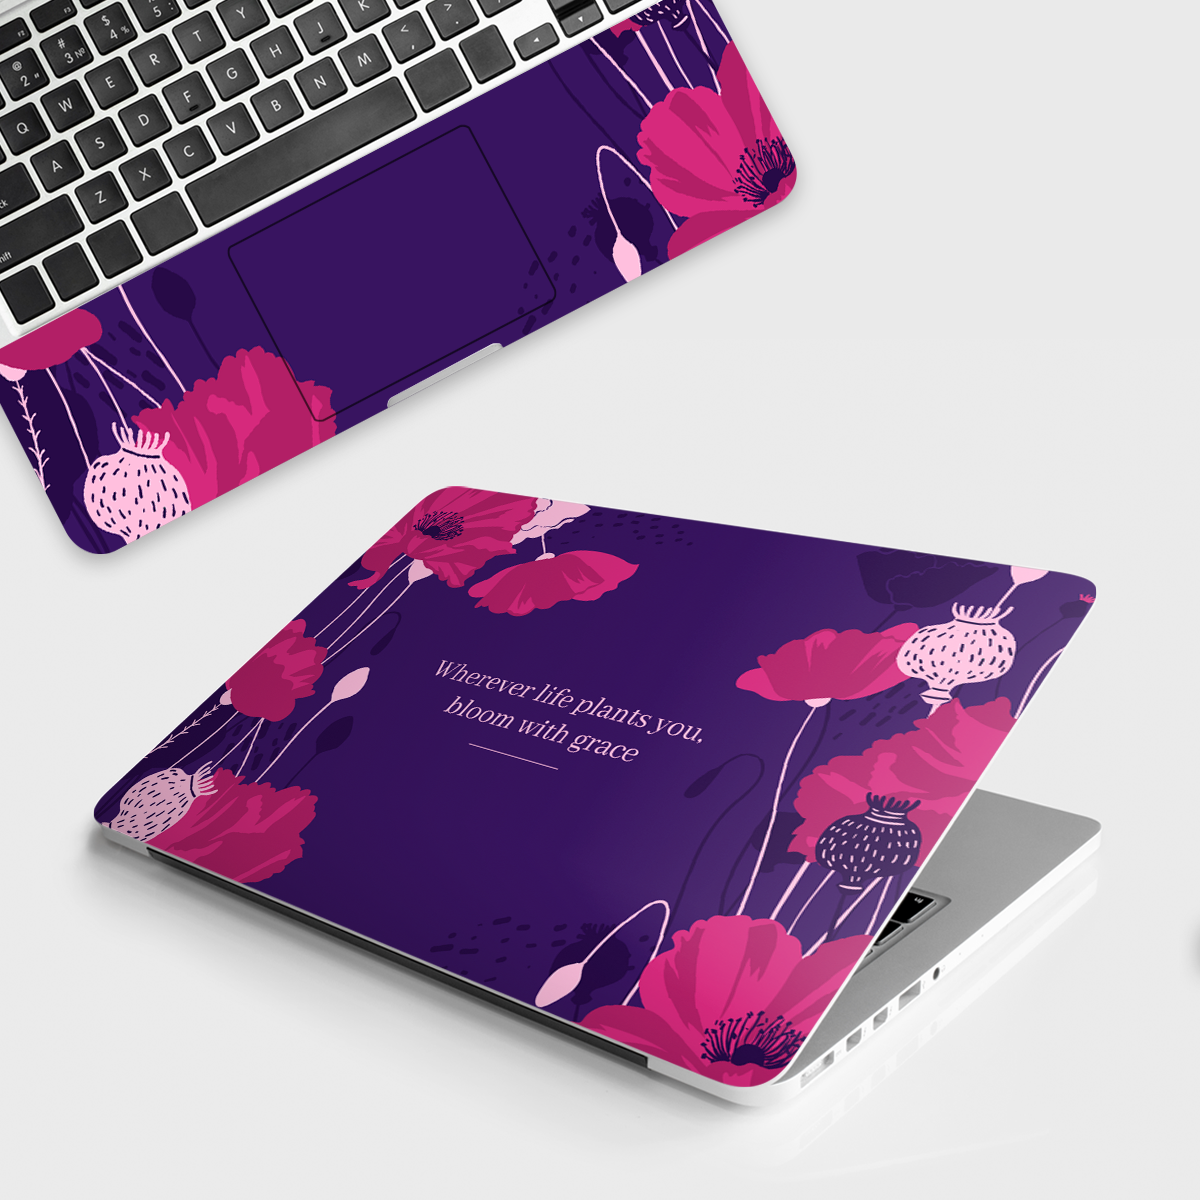 Fomo Store Laptop Skins Quotes Bloom with Grace